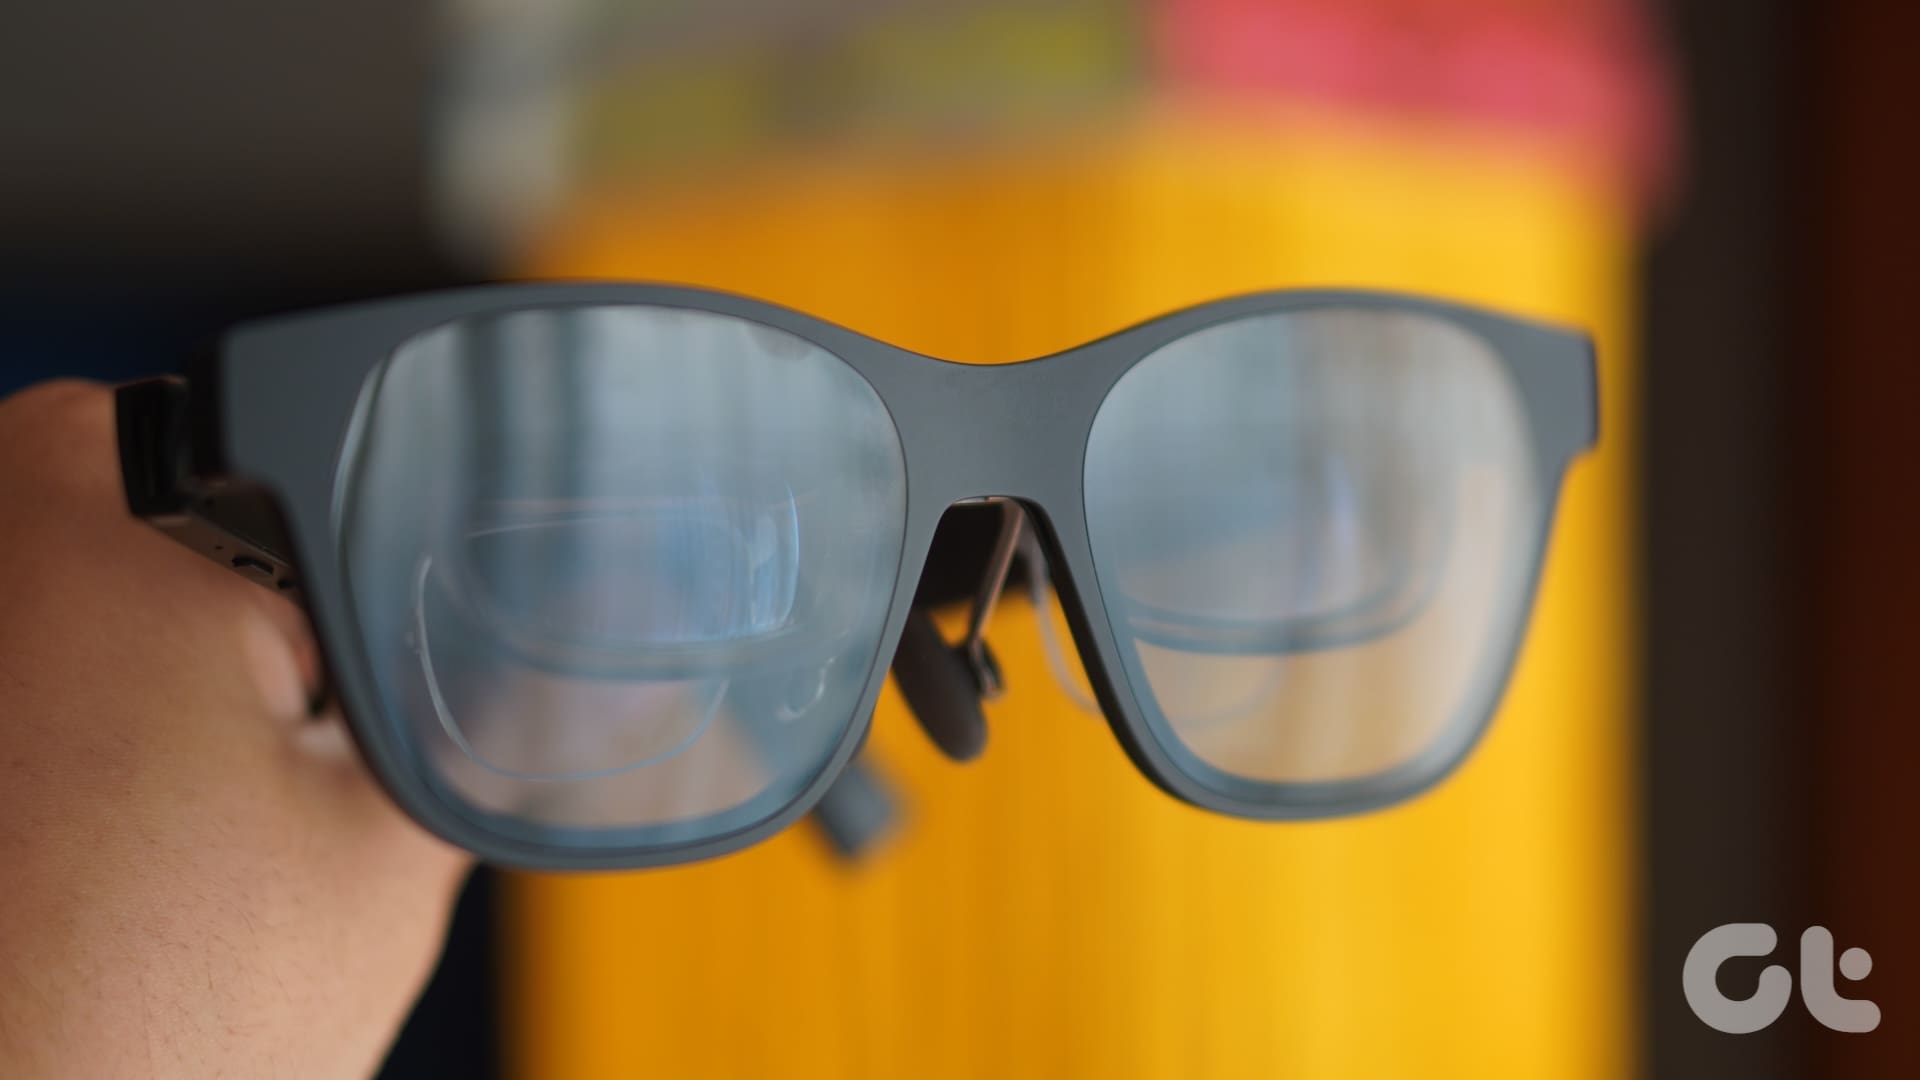 Xreal Air 2 AR glasses review: A first glimpse of spatial computing